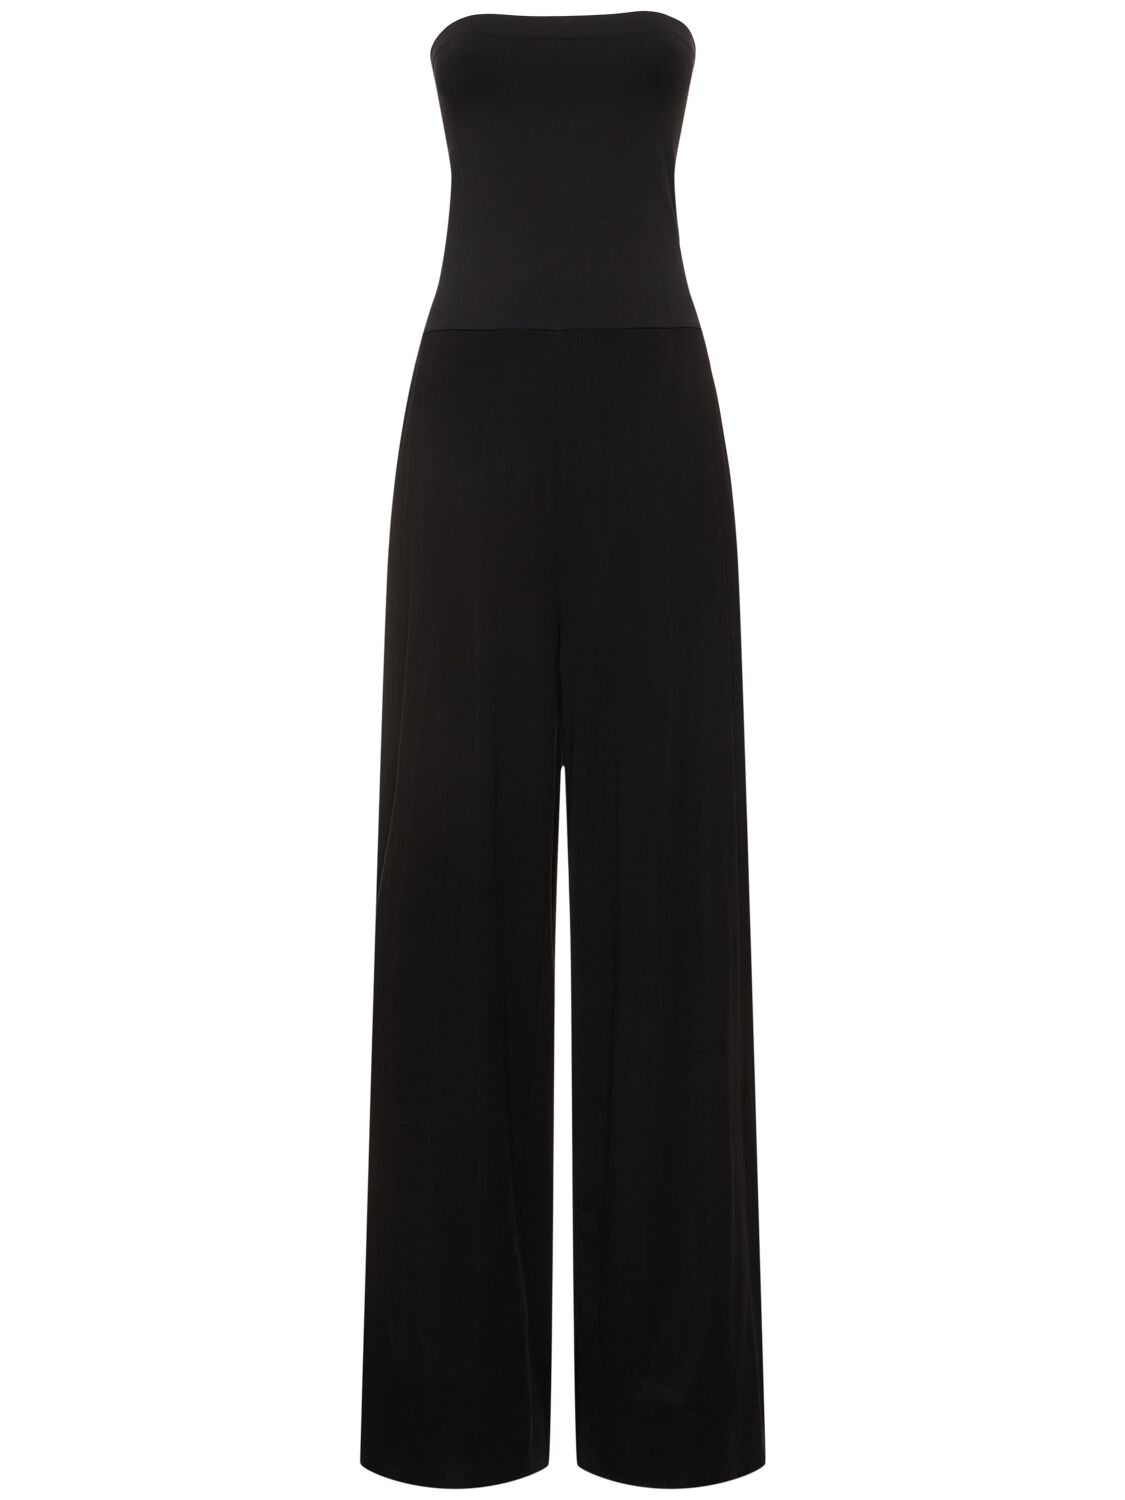 WOLFORD AURORA PURE CONVERTIBLE JUMPSUIT